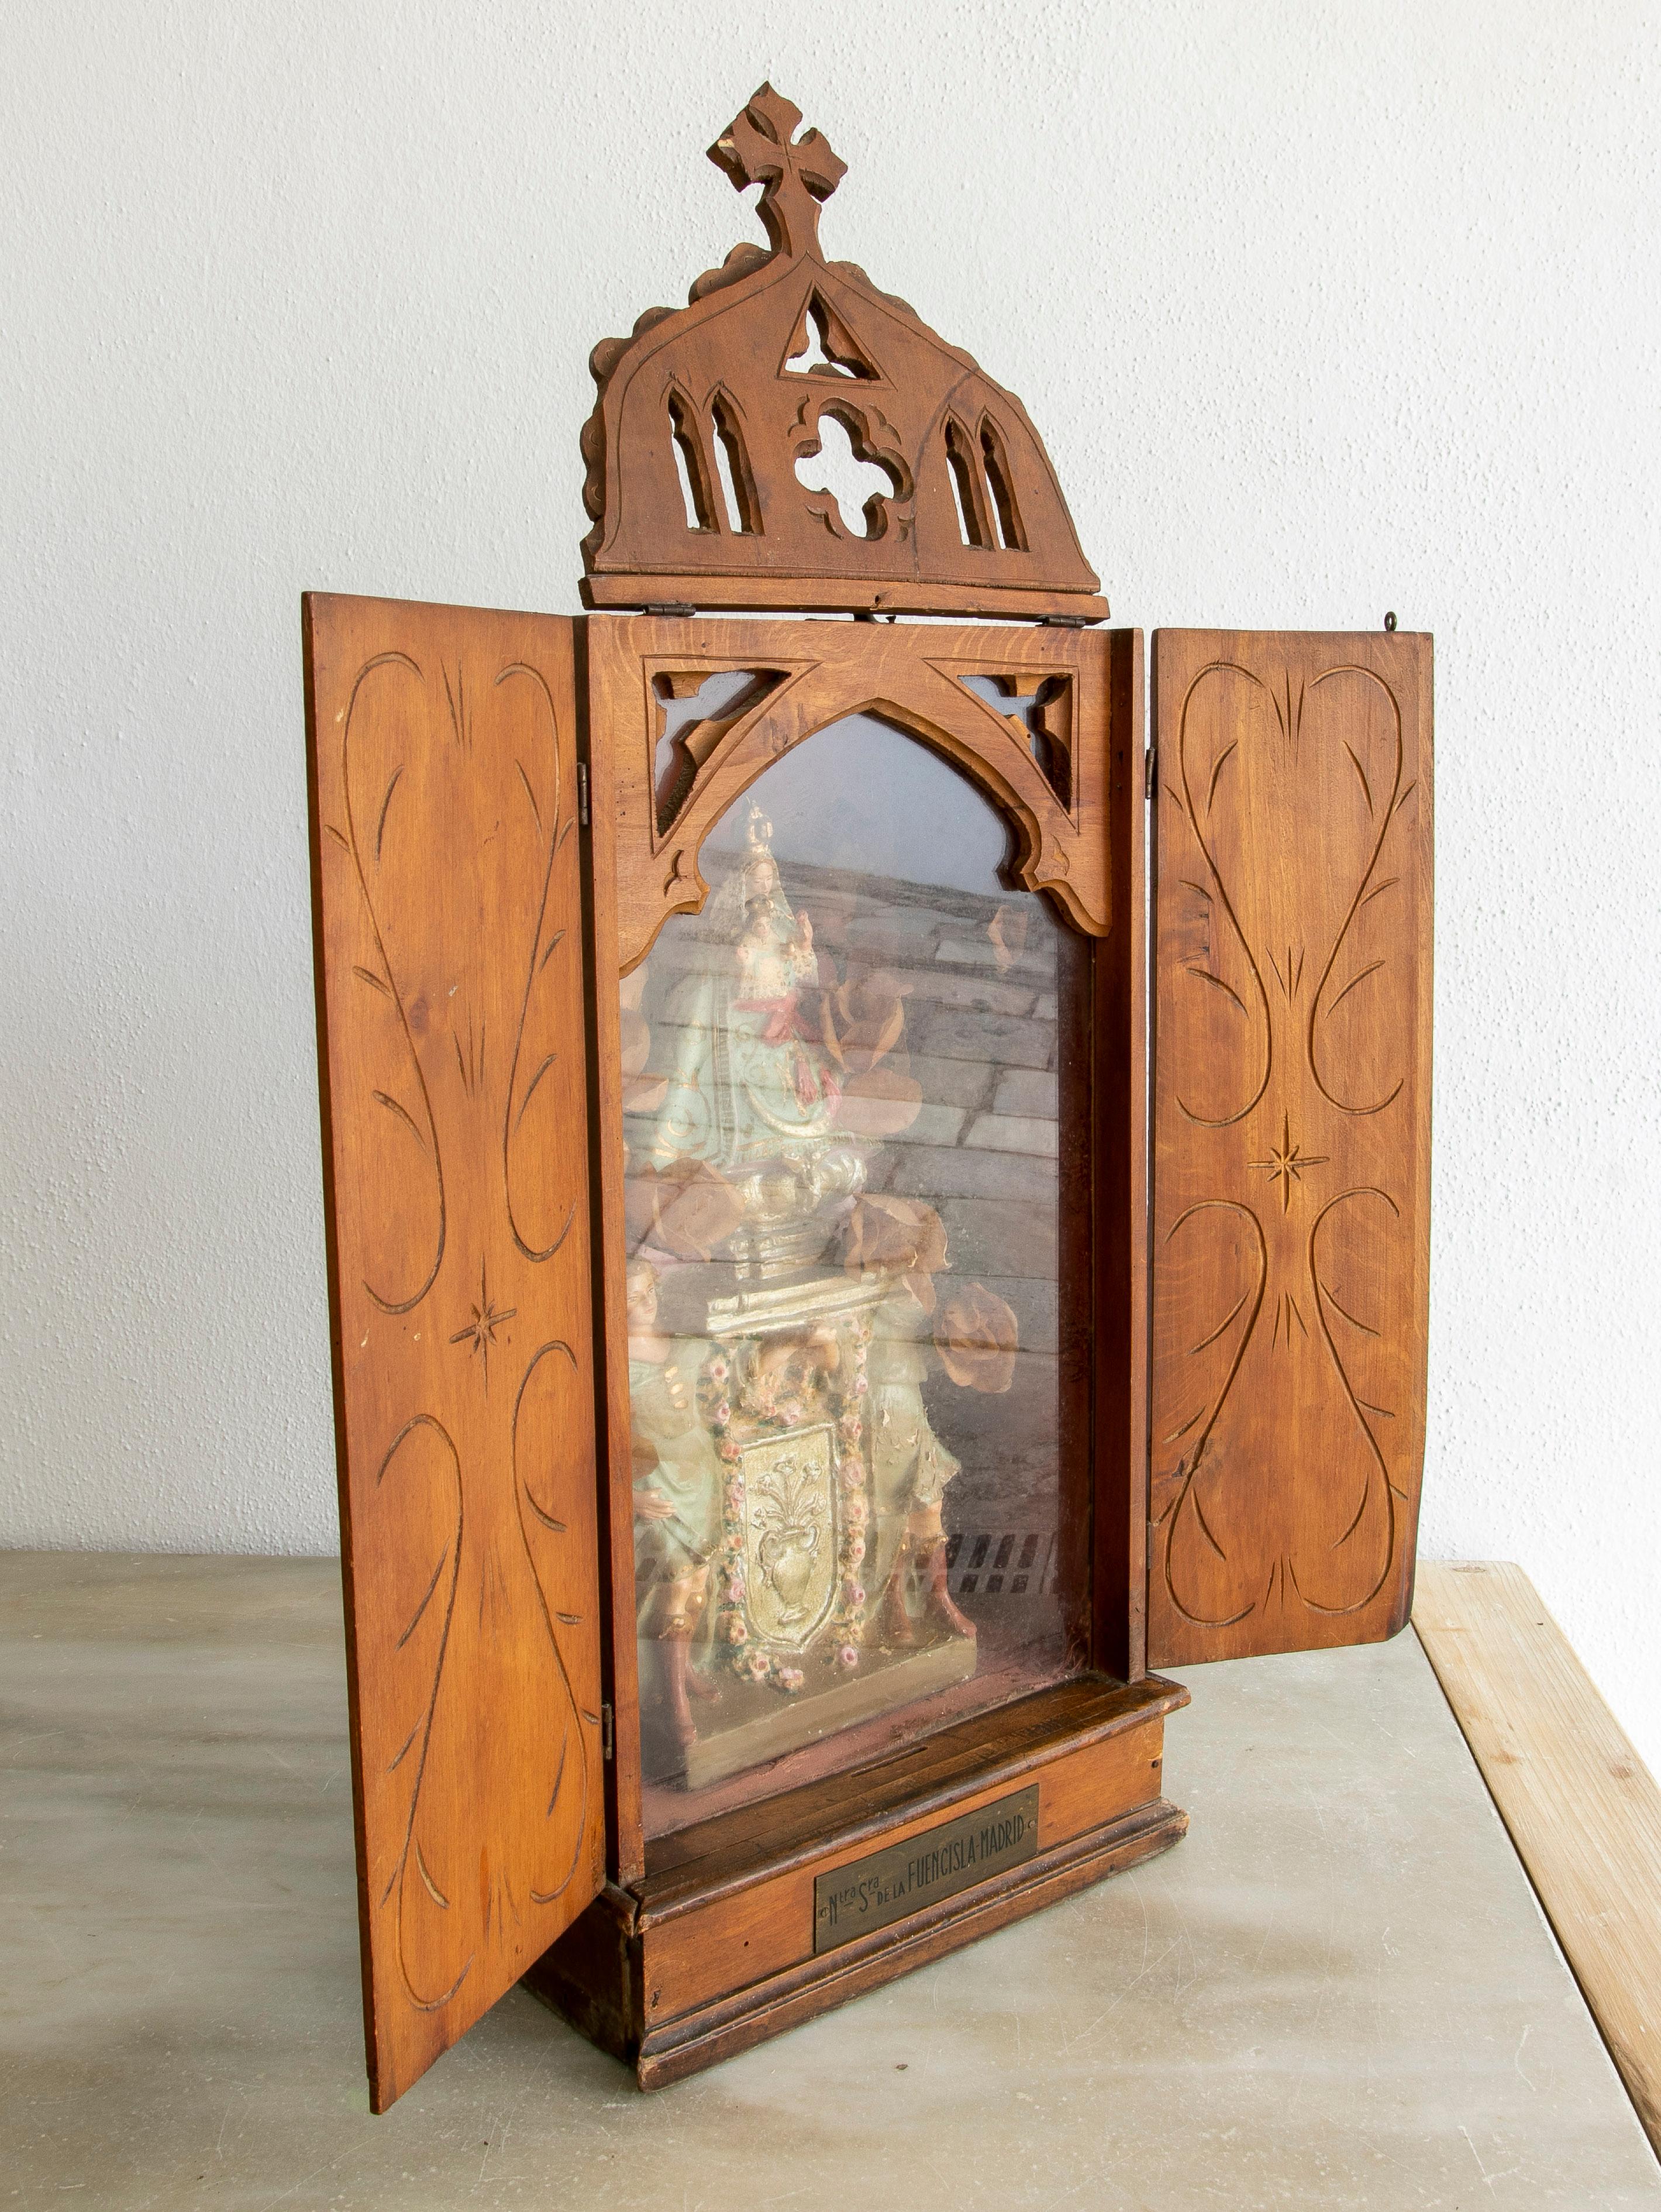 Late 19th century Spanish terracotta figure sculpture of Virgin Fuencisla of Segovia, in its own custom wooden box so that the image could be easily transported and shared among neighbours of the same parish.